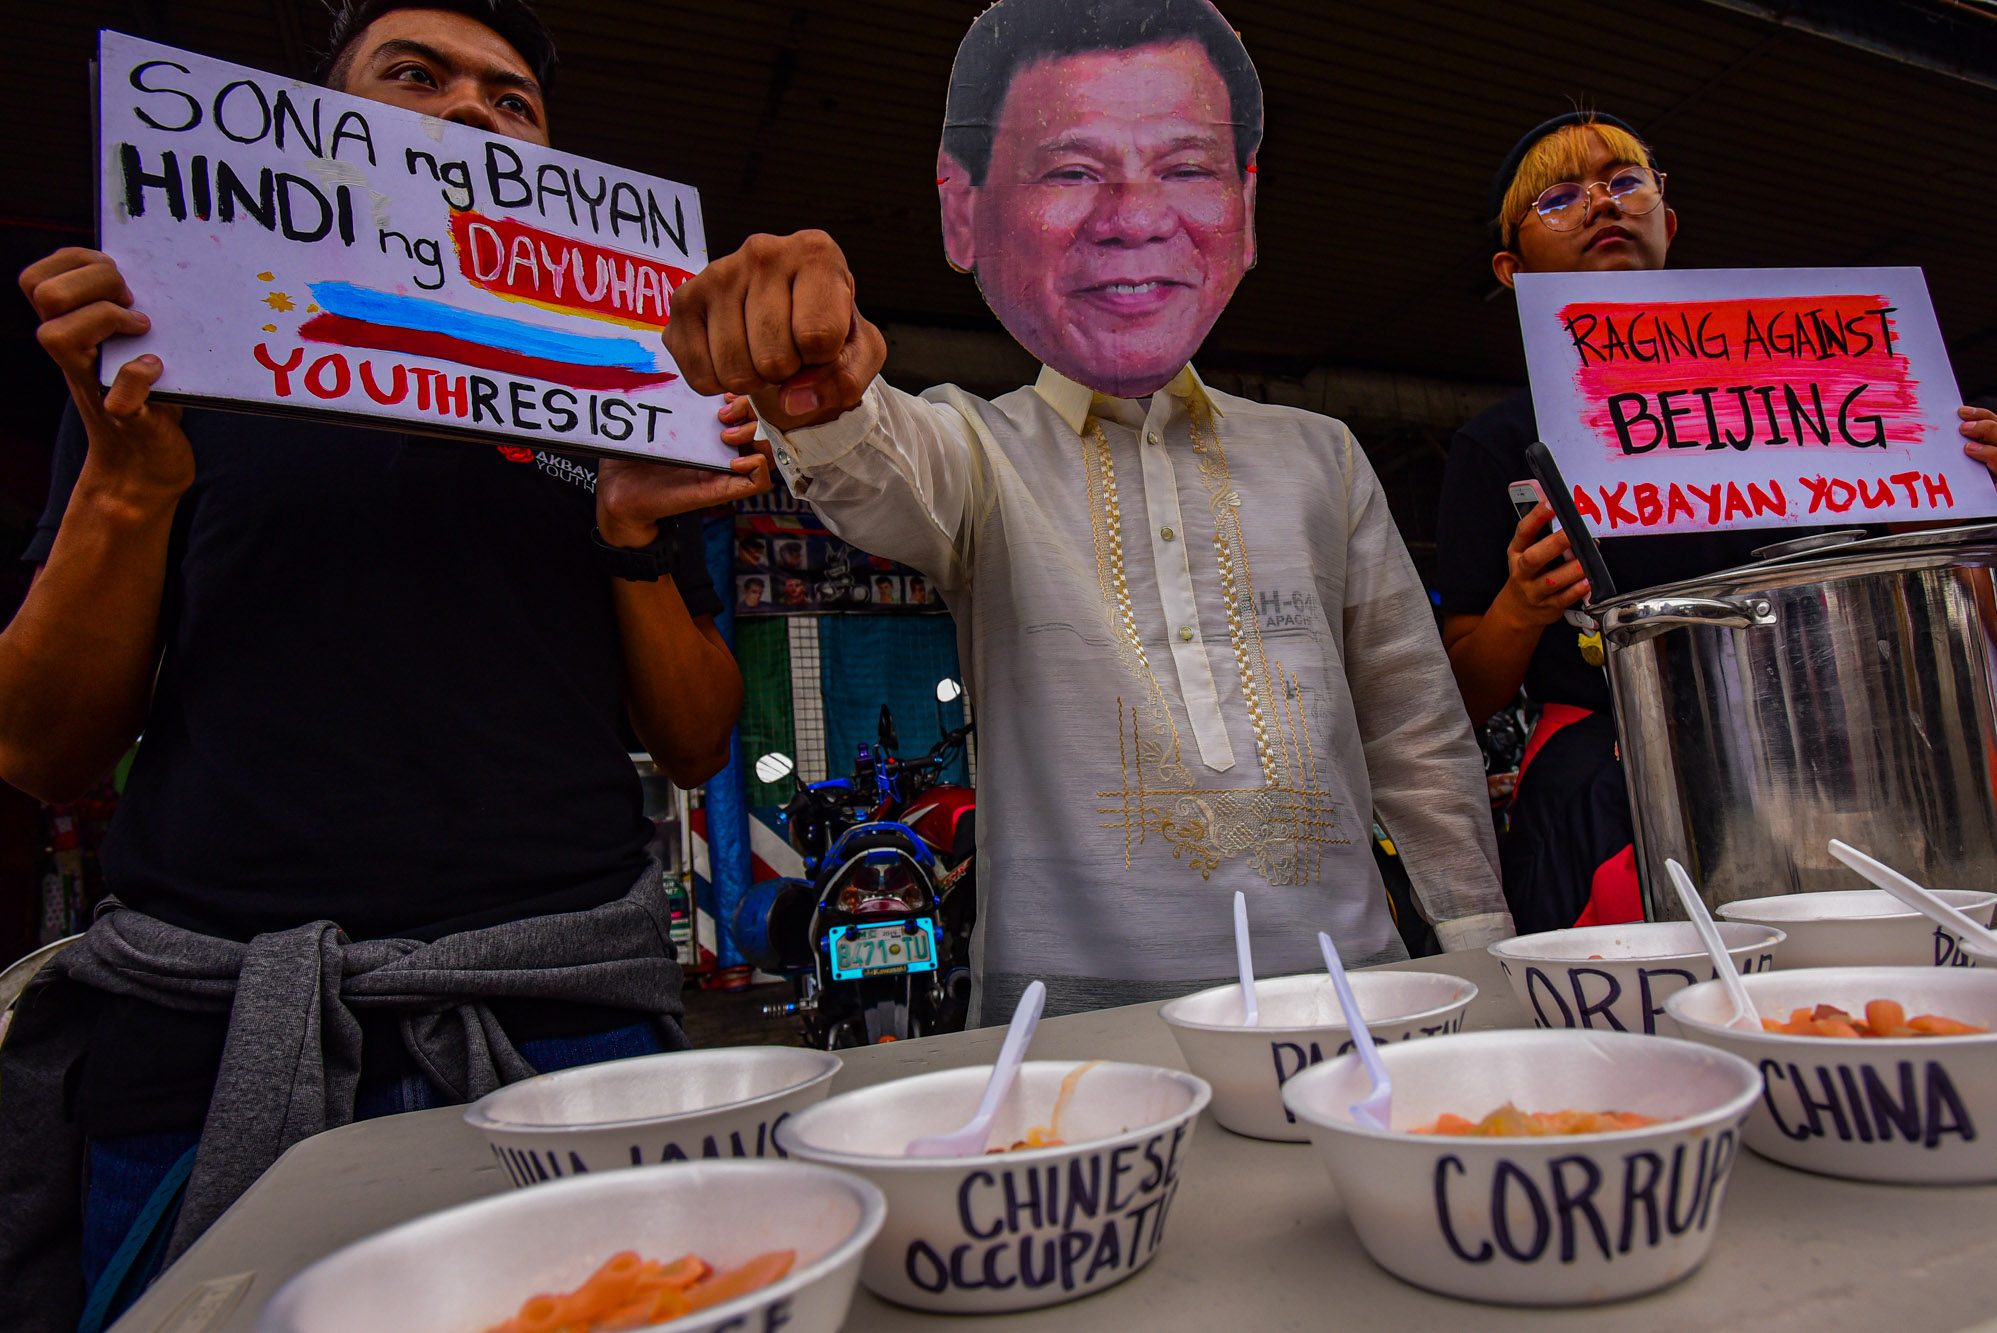 PRIORITIES. In an alternative SONA activity called SOPAS: State of the Province of China Address, a man wearing a Duterte mask gives out soup bowls labeled with Duterte's failed promises and twisted priorities. Photo by Maria Tan/Rappler 